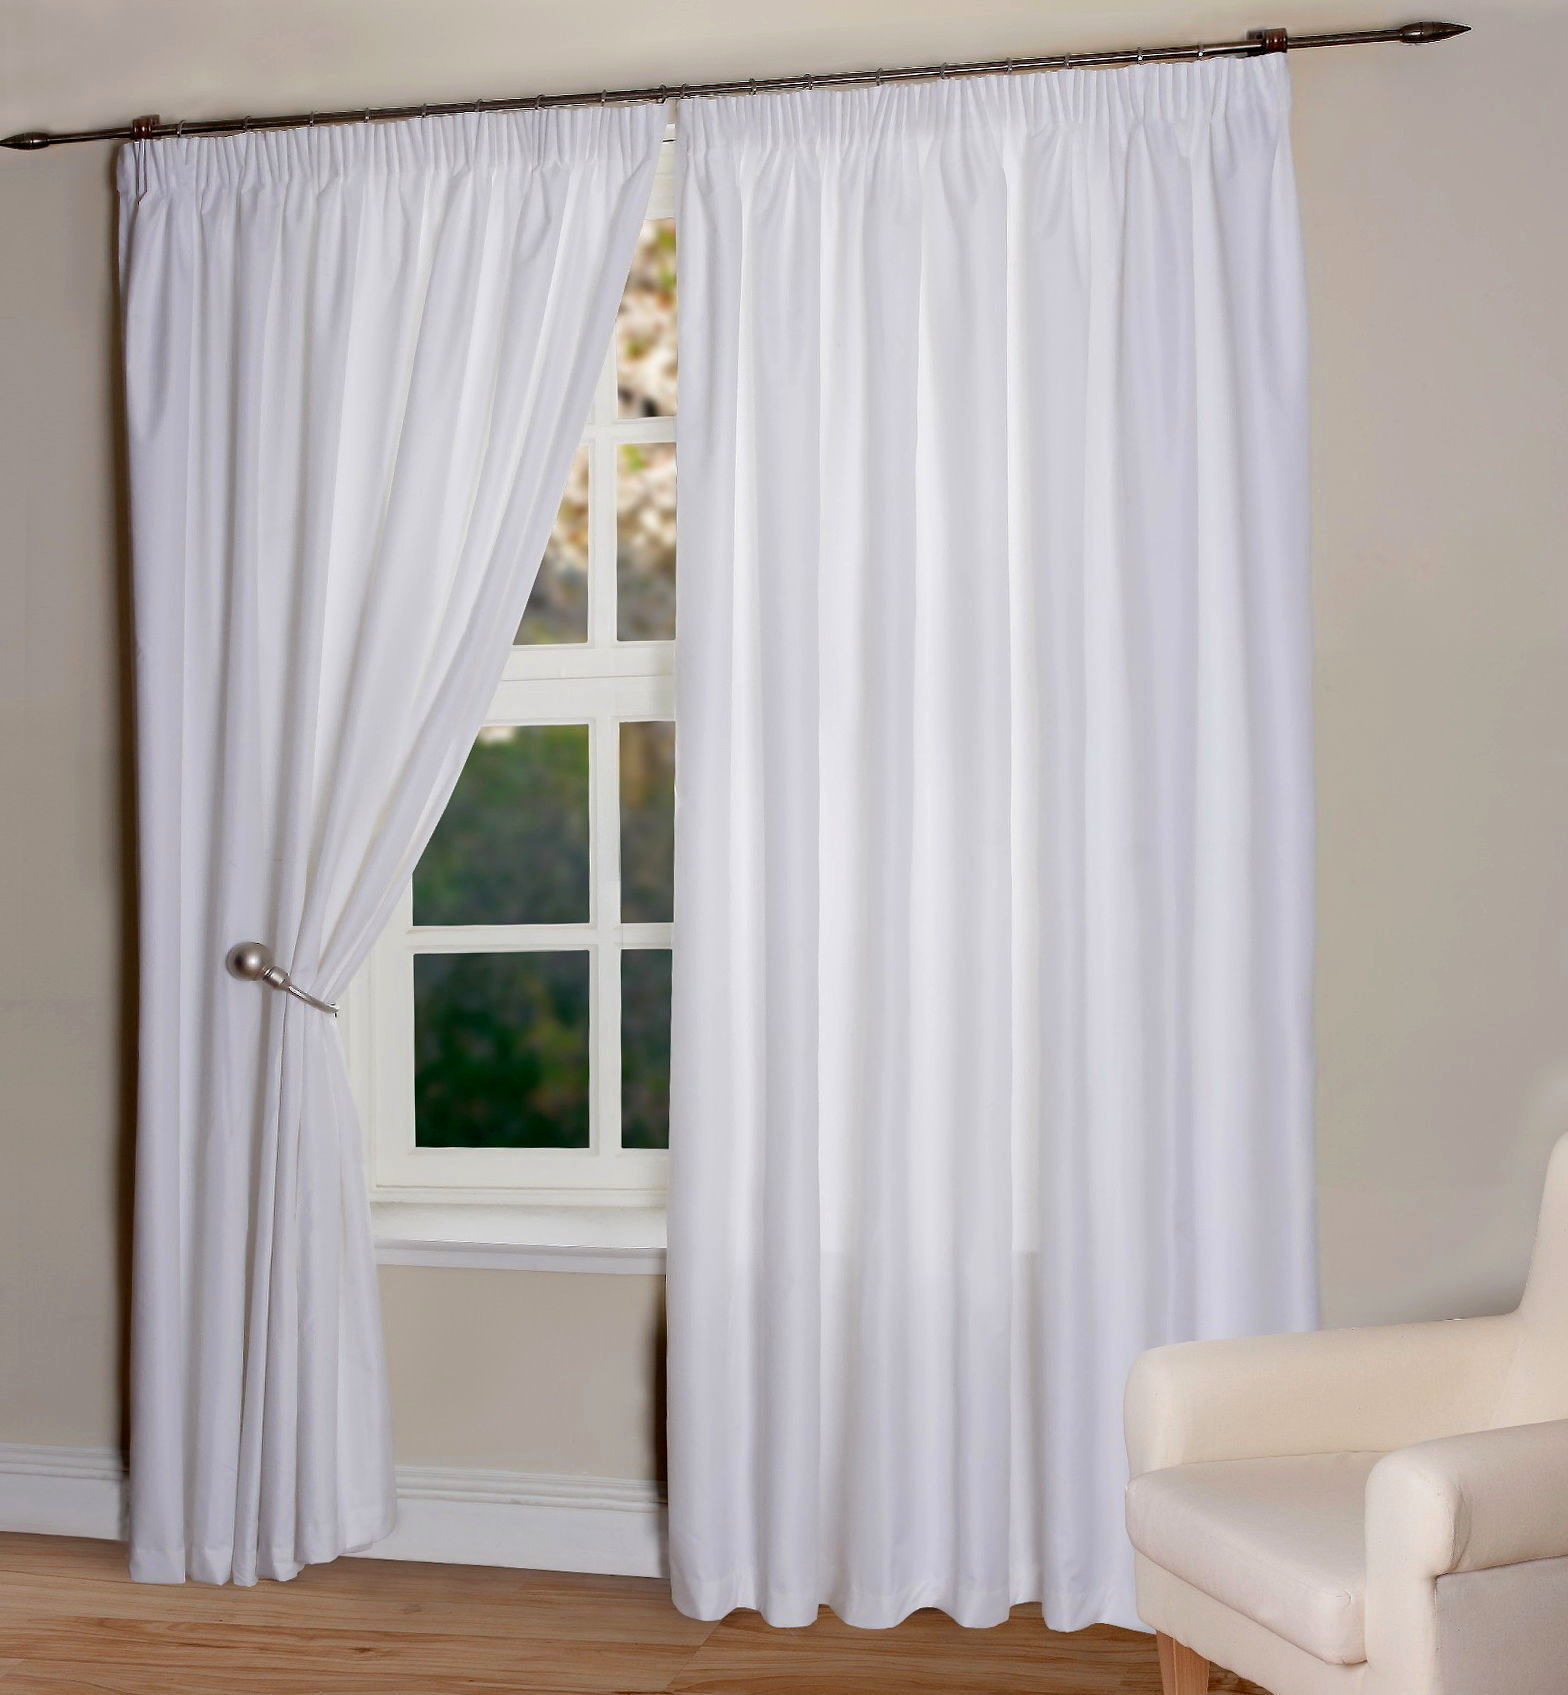 Walmart Kitchen Curtains
 Curtain Add Fresh Style And Color To Your Home With